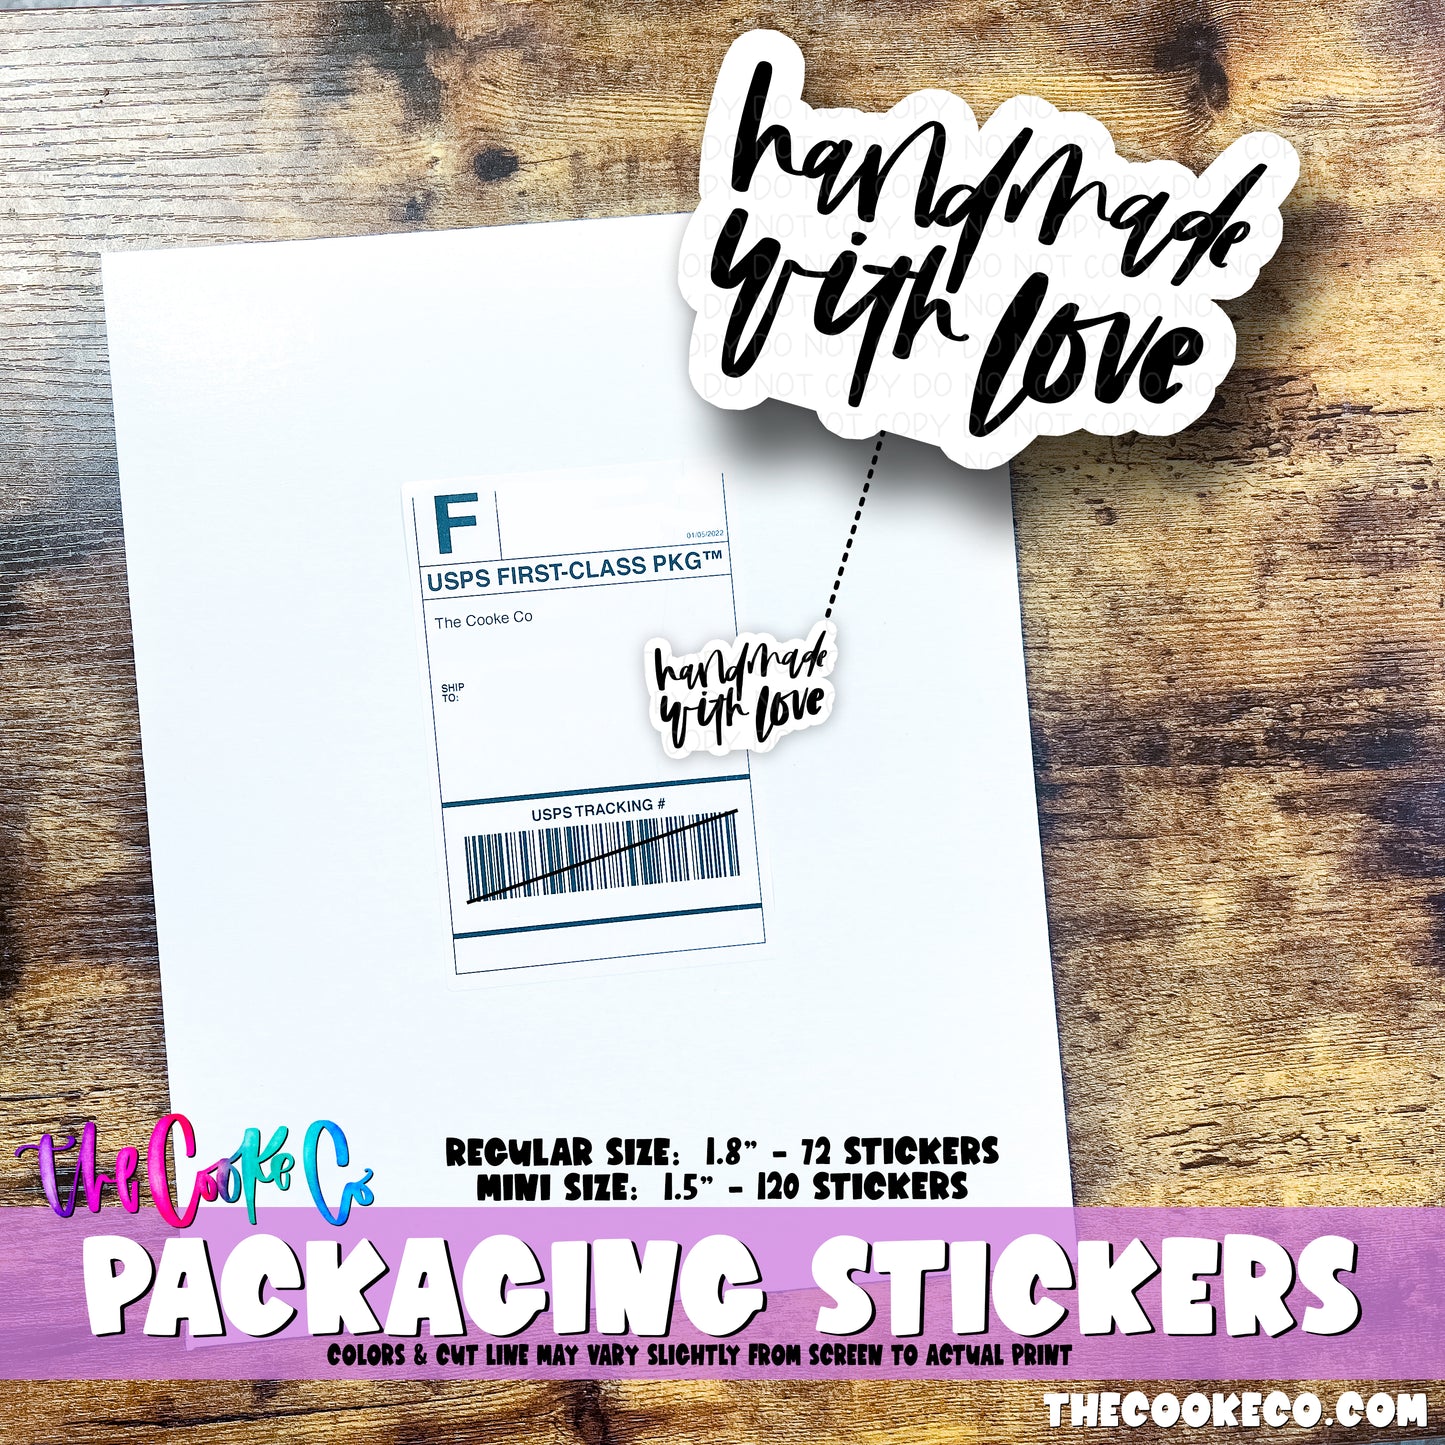 Packaging Stickers | #BW0212 - HANDMADE WITH LOVE